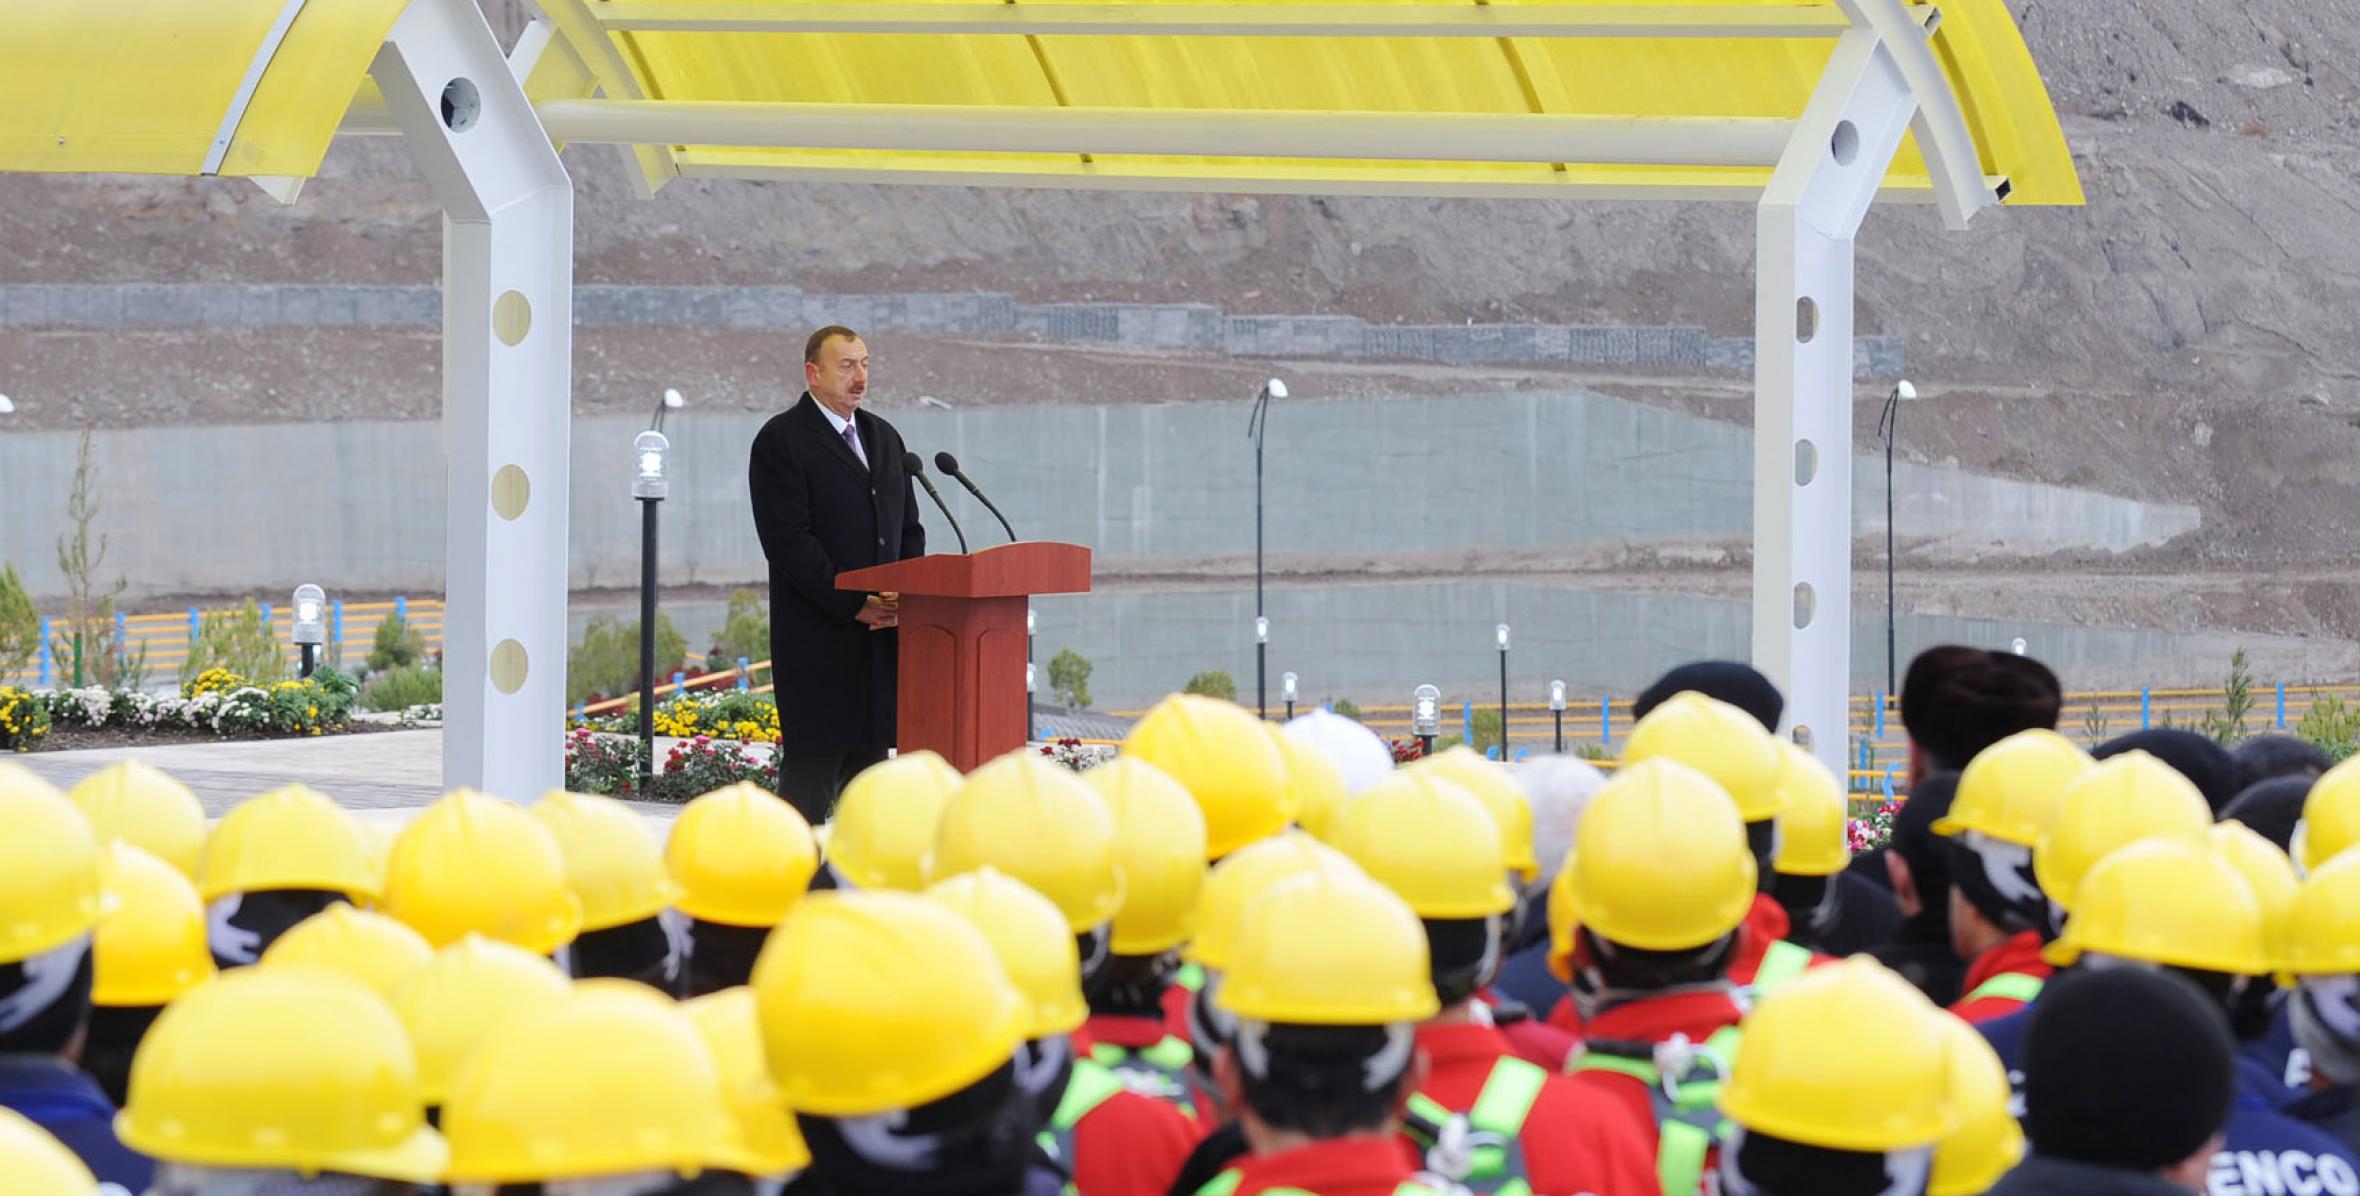 Speech by Ilham Aliyev at the opening of the Fuzuli Hydroelectric Power Station